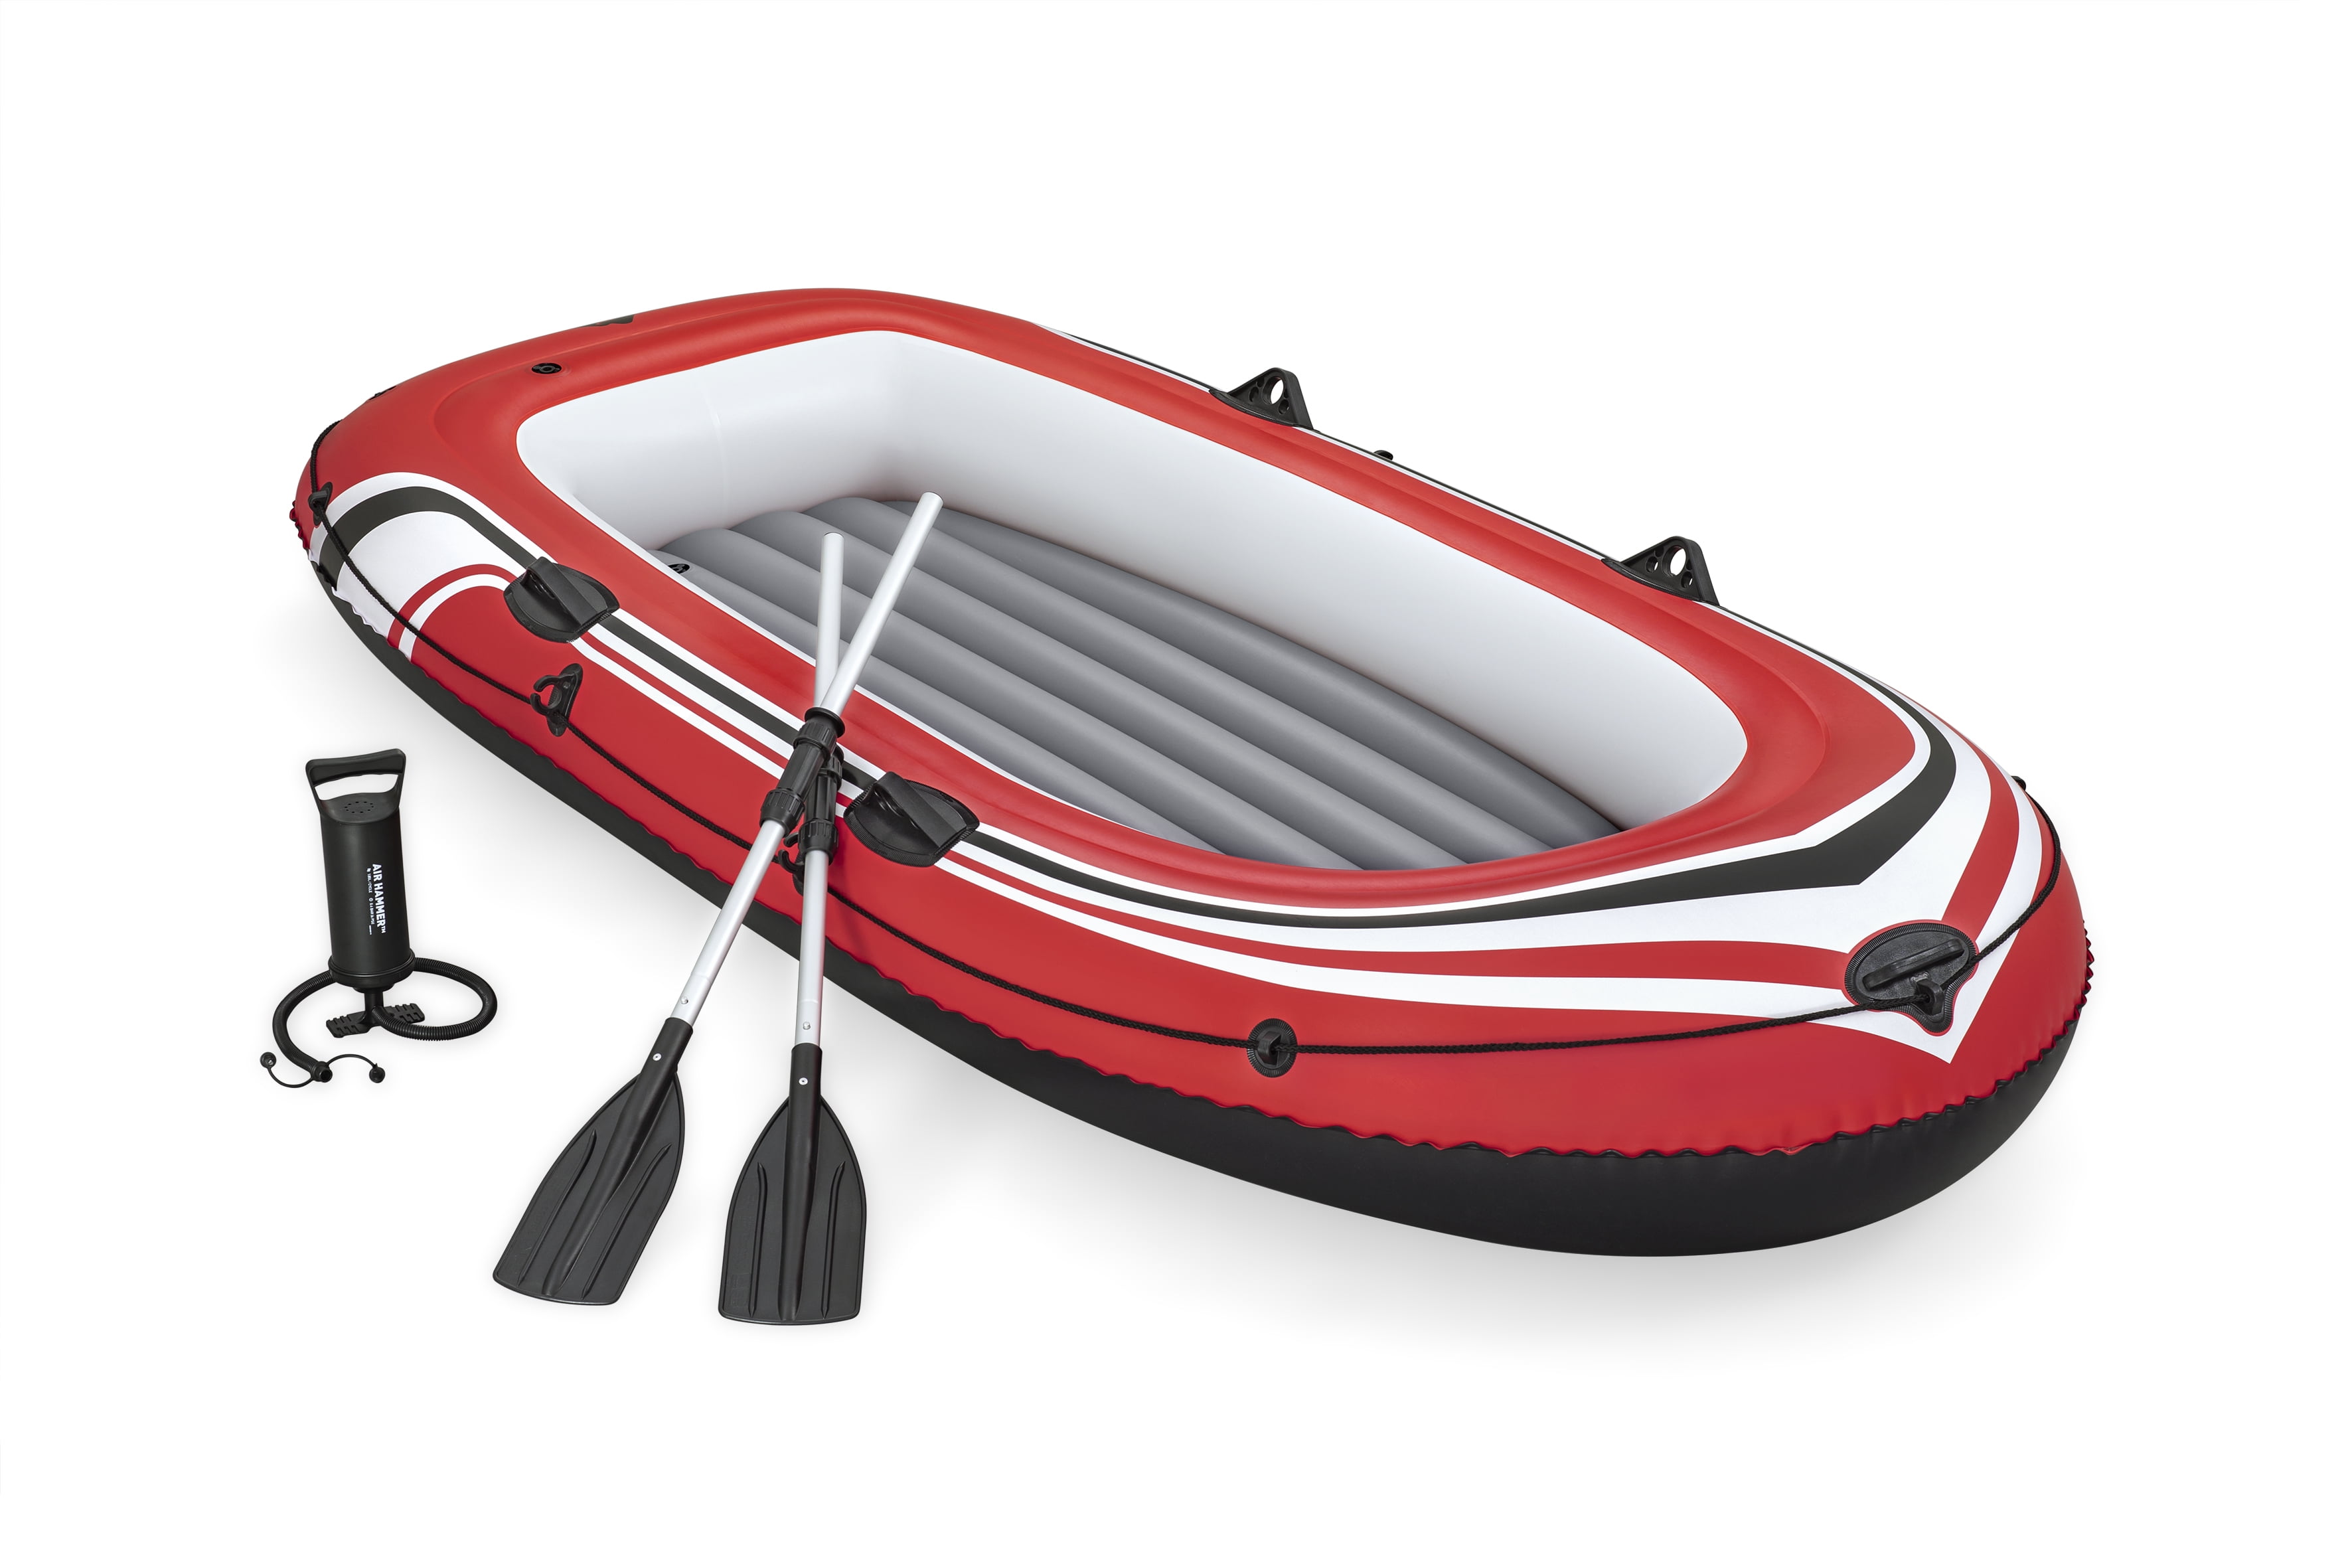 Intex Mariner 3, 3-Person Inflatable River/Lake Dinghy Boat & Oars Set 